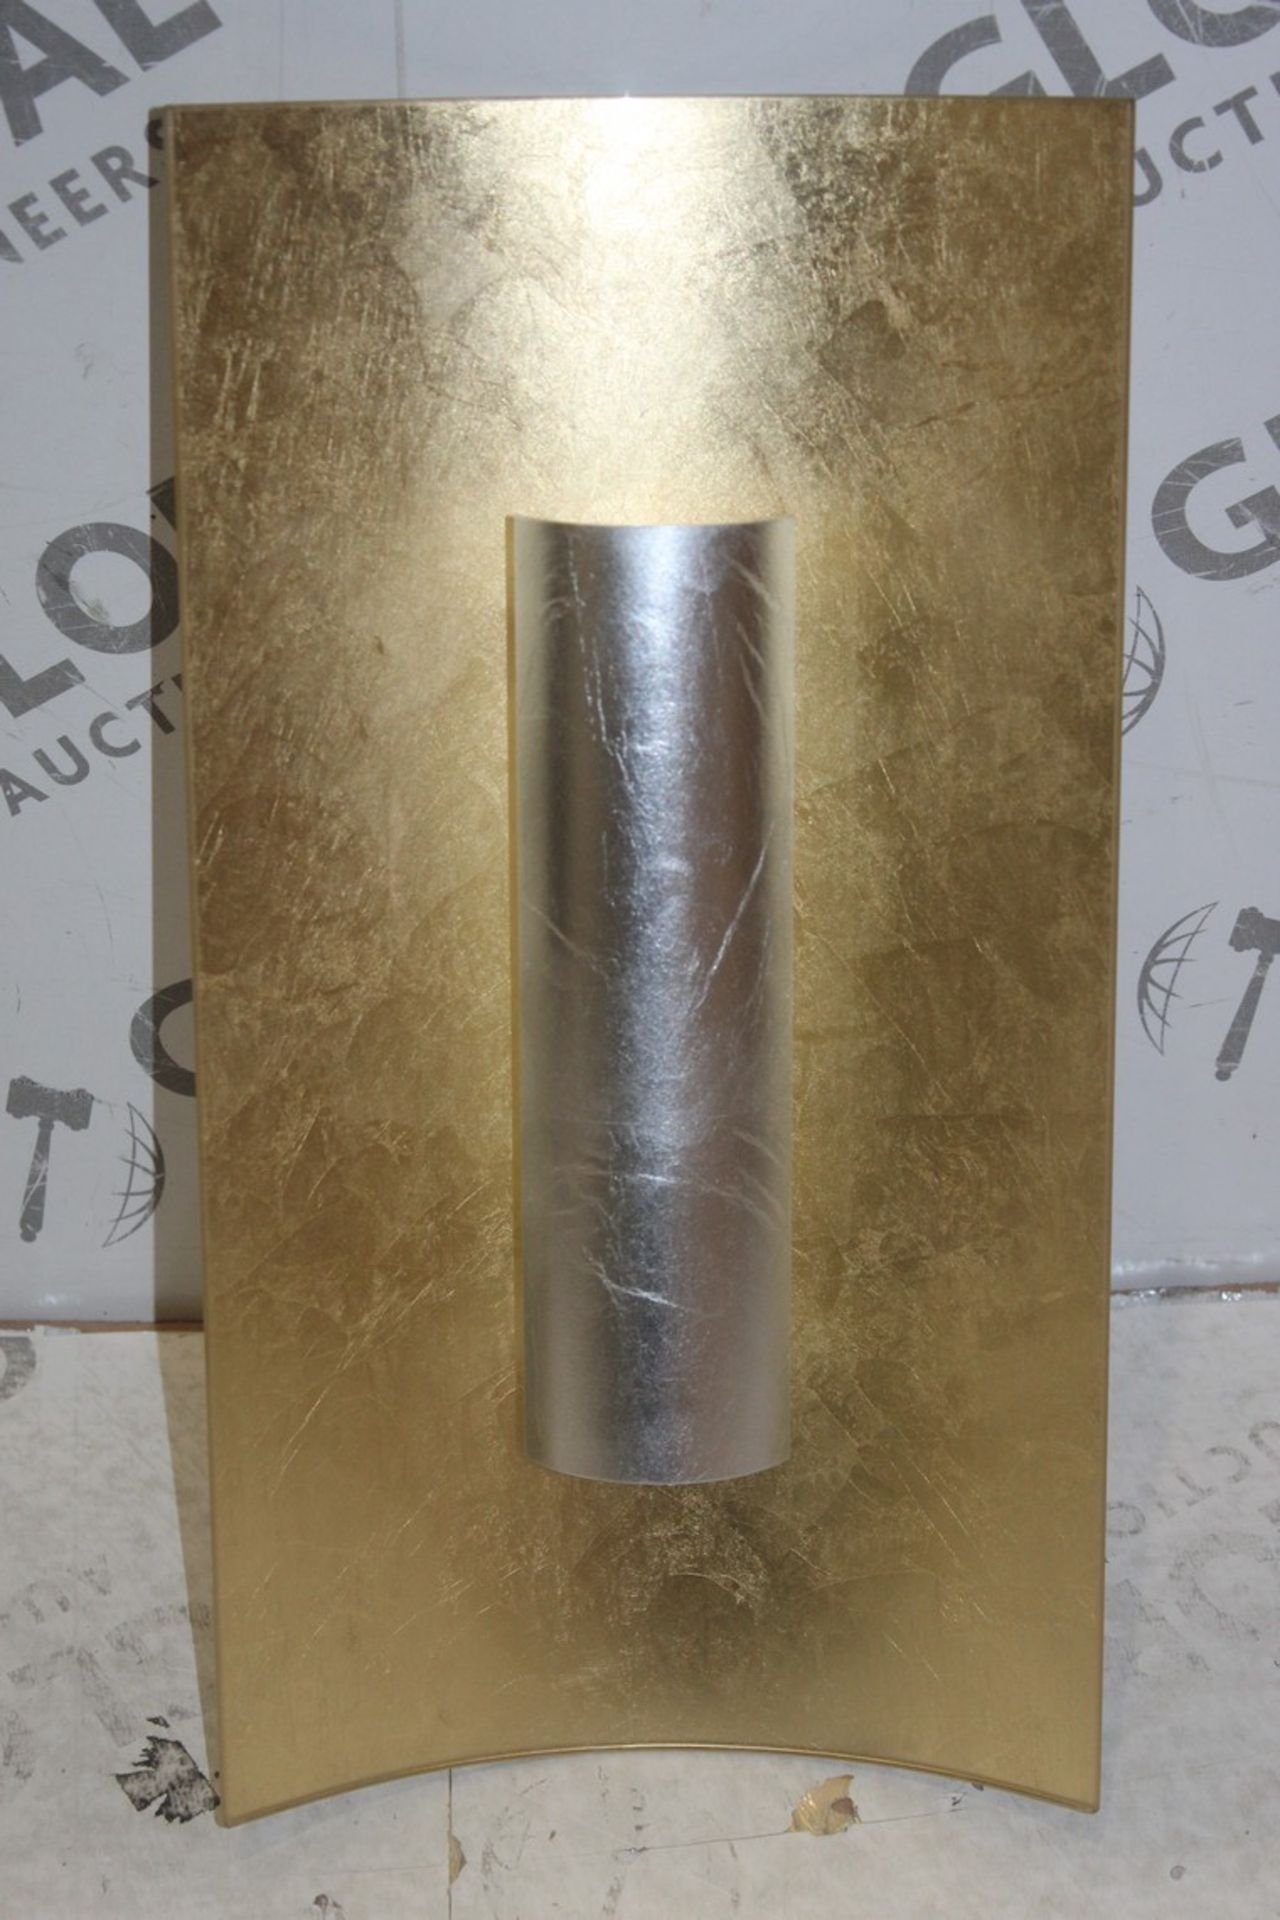 Boxed Kogl-leuchten Designer Arch Wall Light RRP £220 (Pictures Are For Illustration Purposes